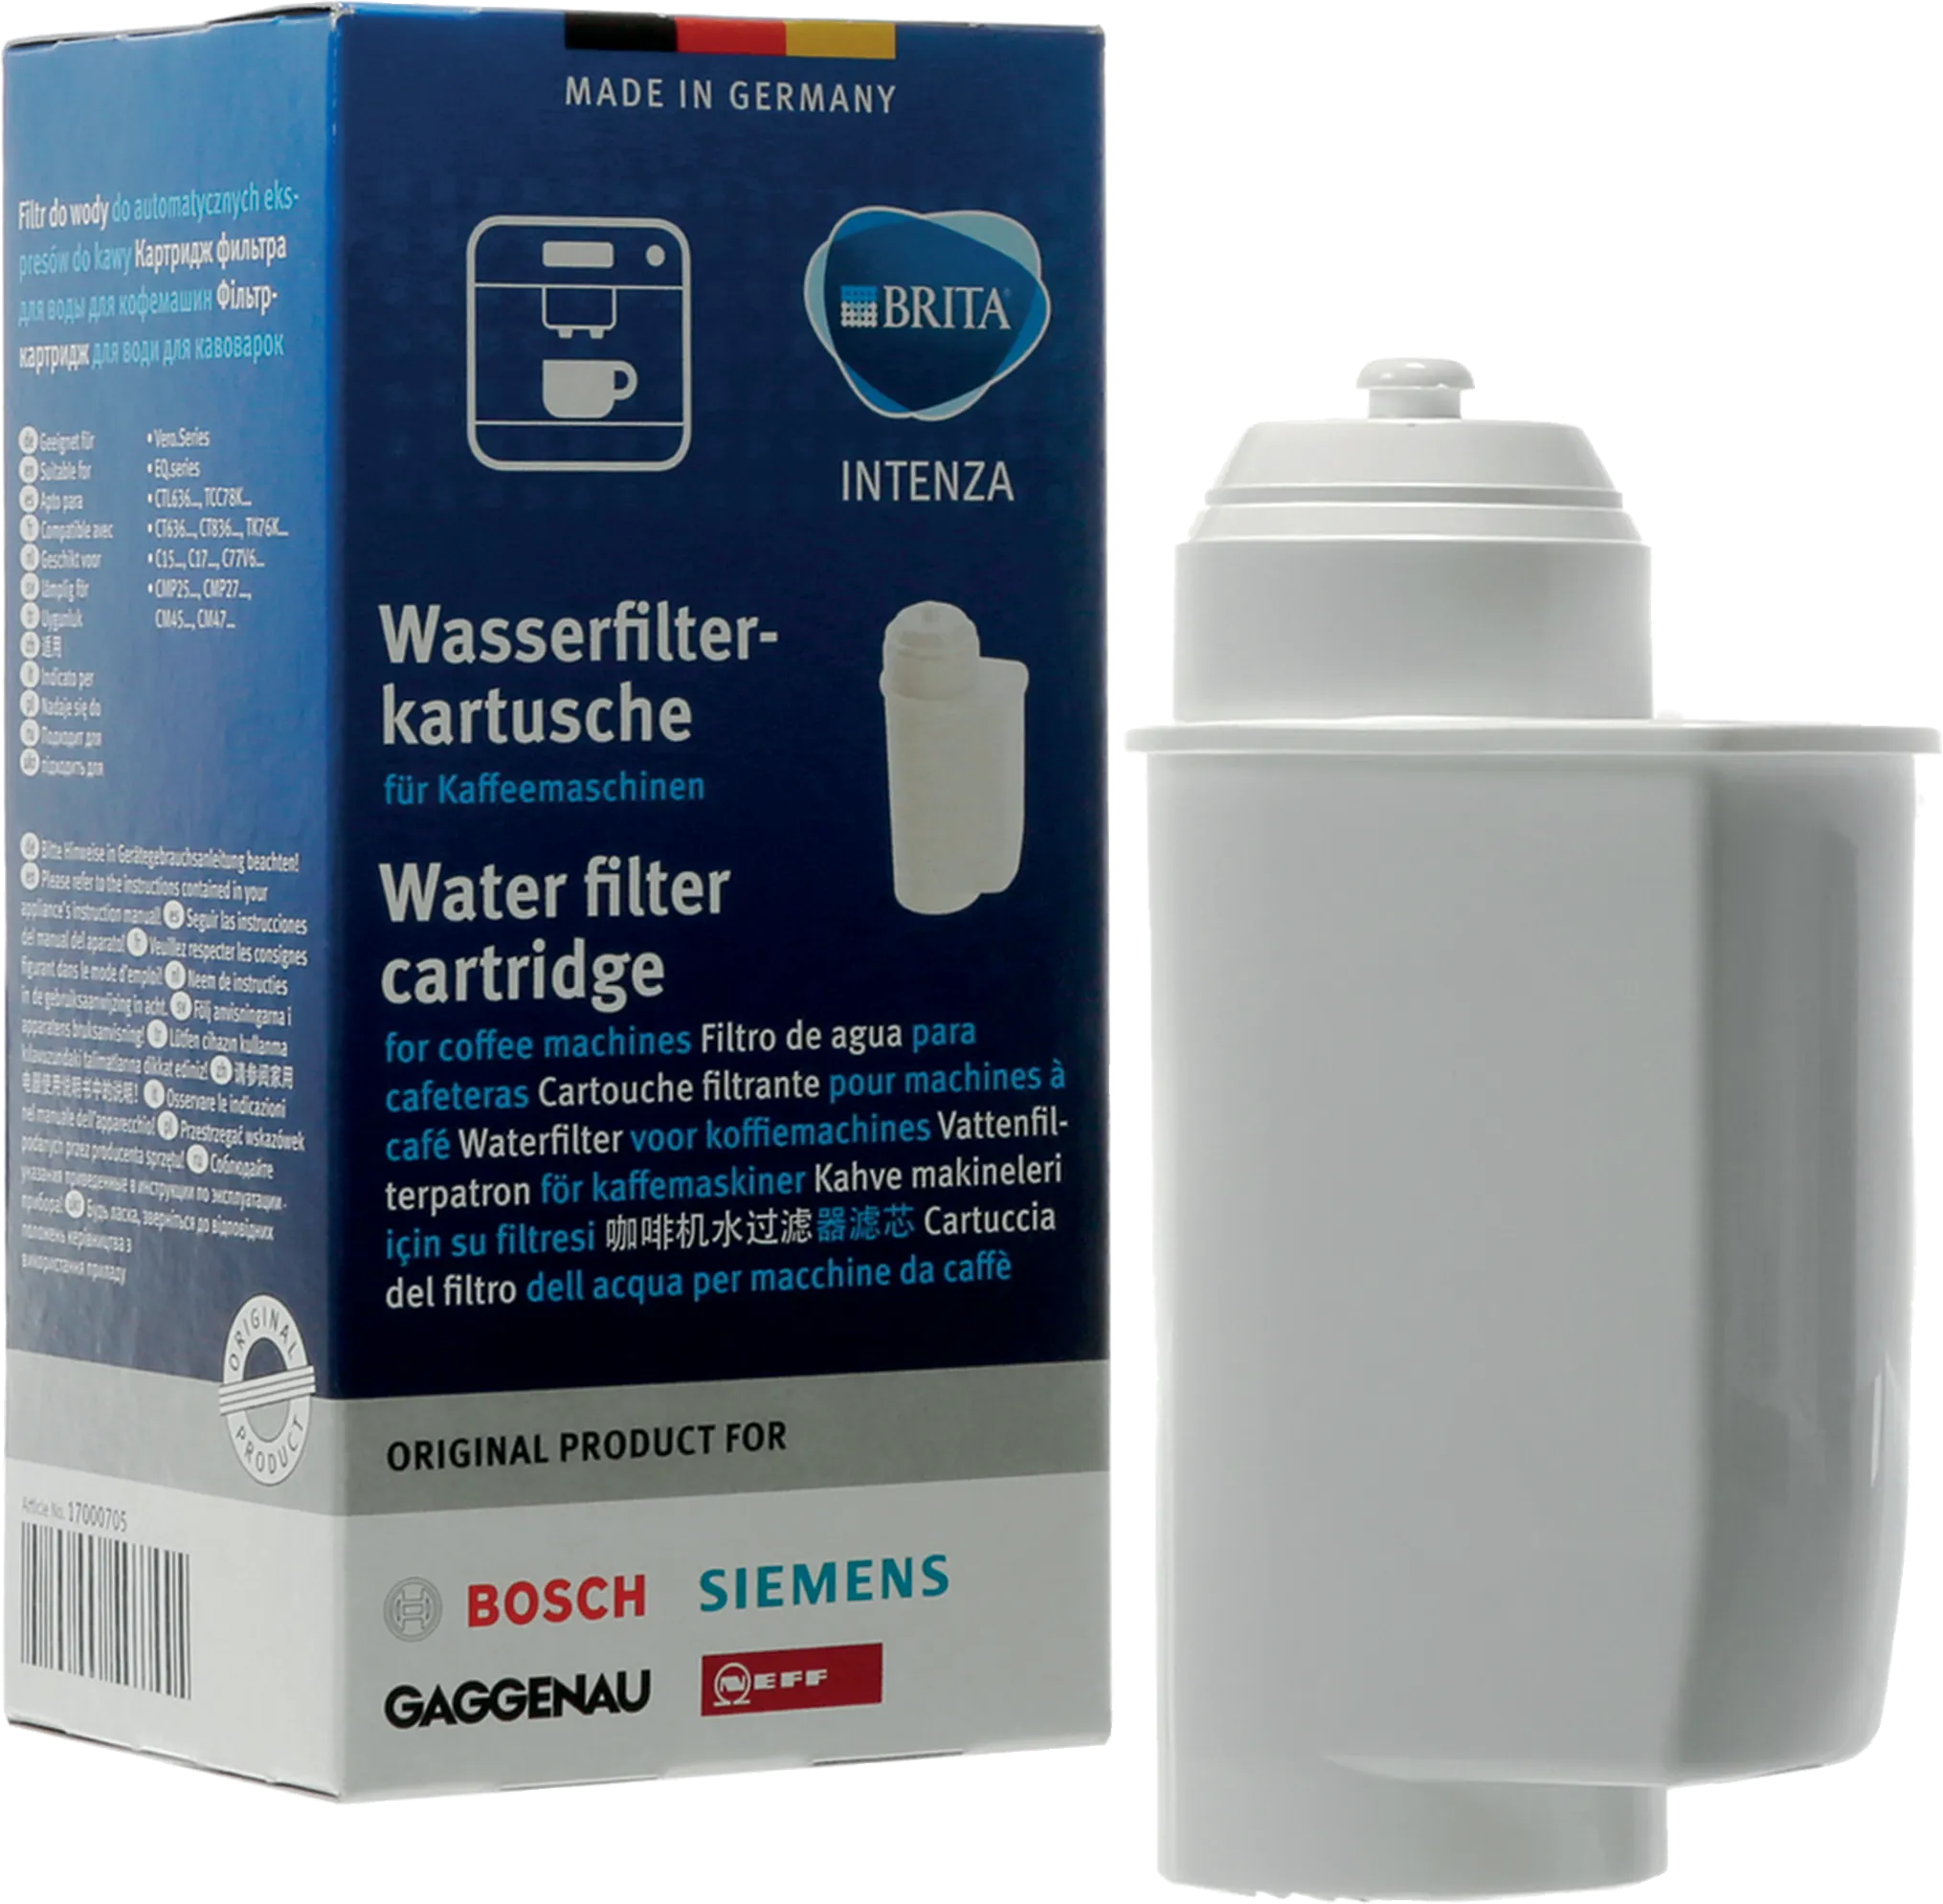 Water filter BRITA Intenza Water Filter for coffee machines Contents: 1x water filter 